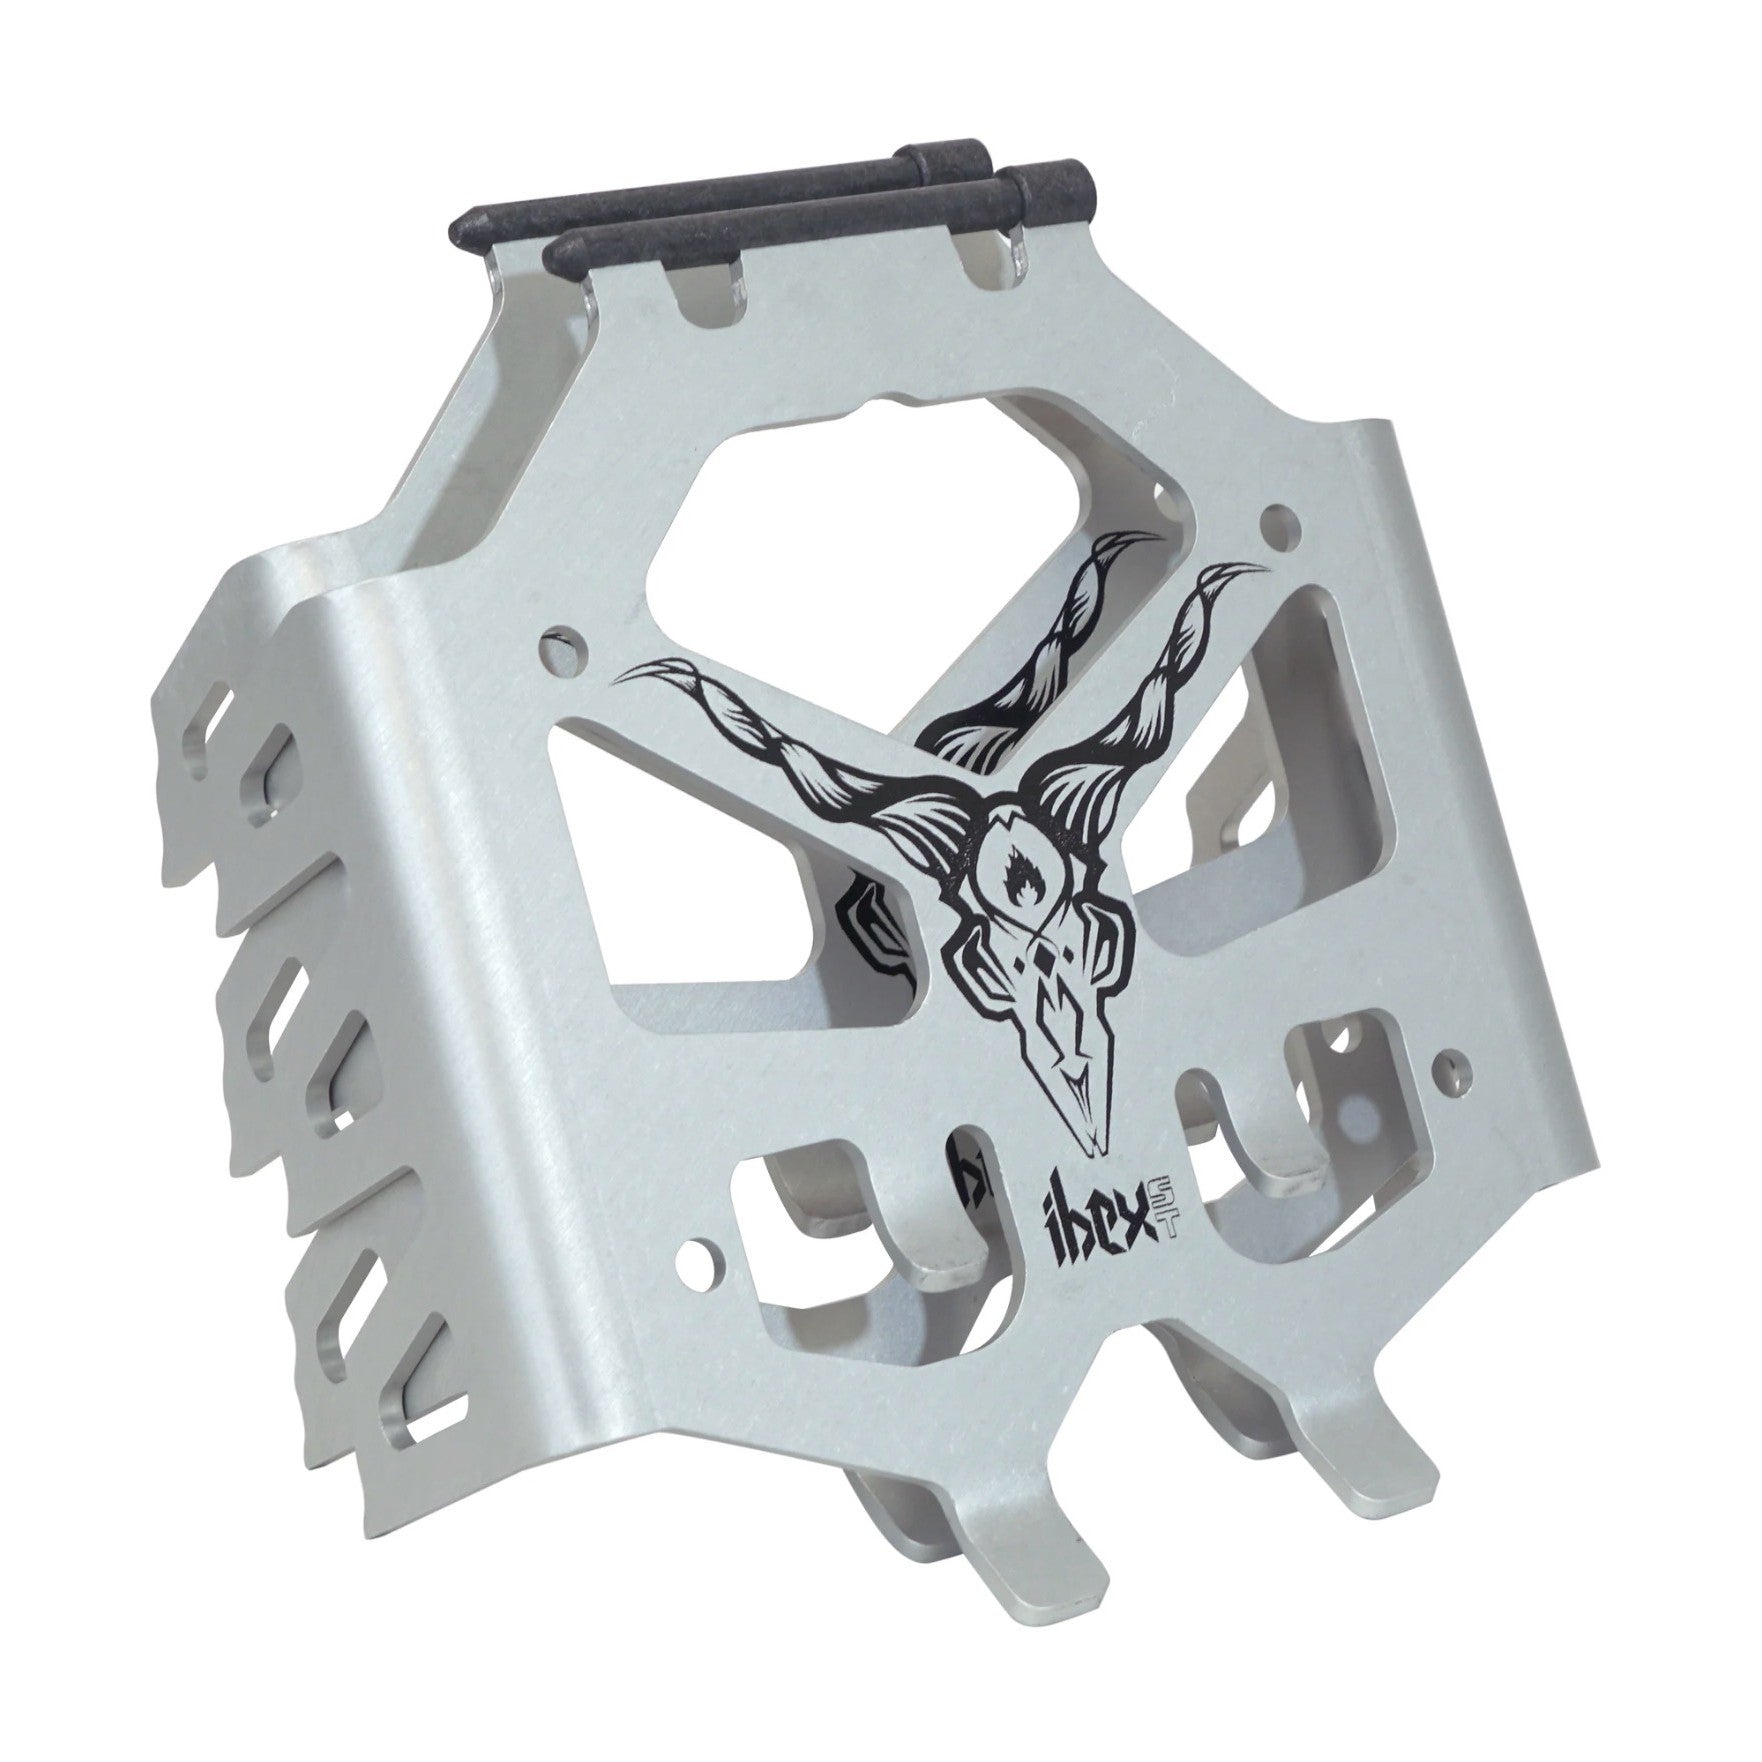 Spark - Ibex ST Crampons (Paire) - Wide - Metal